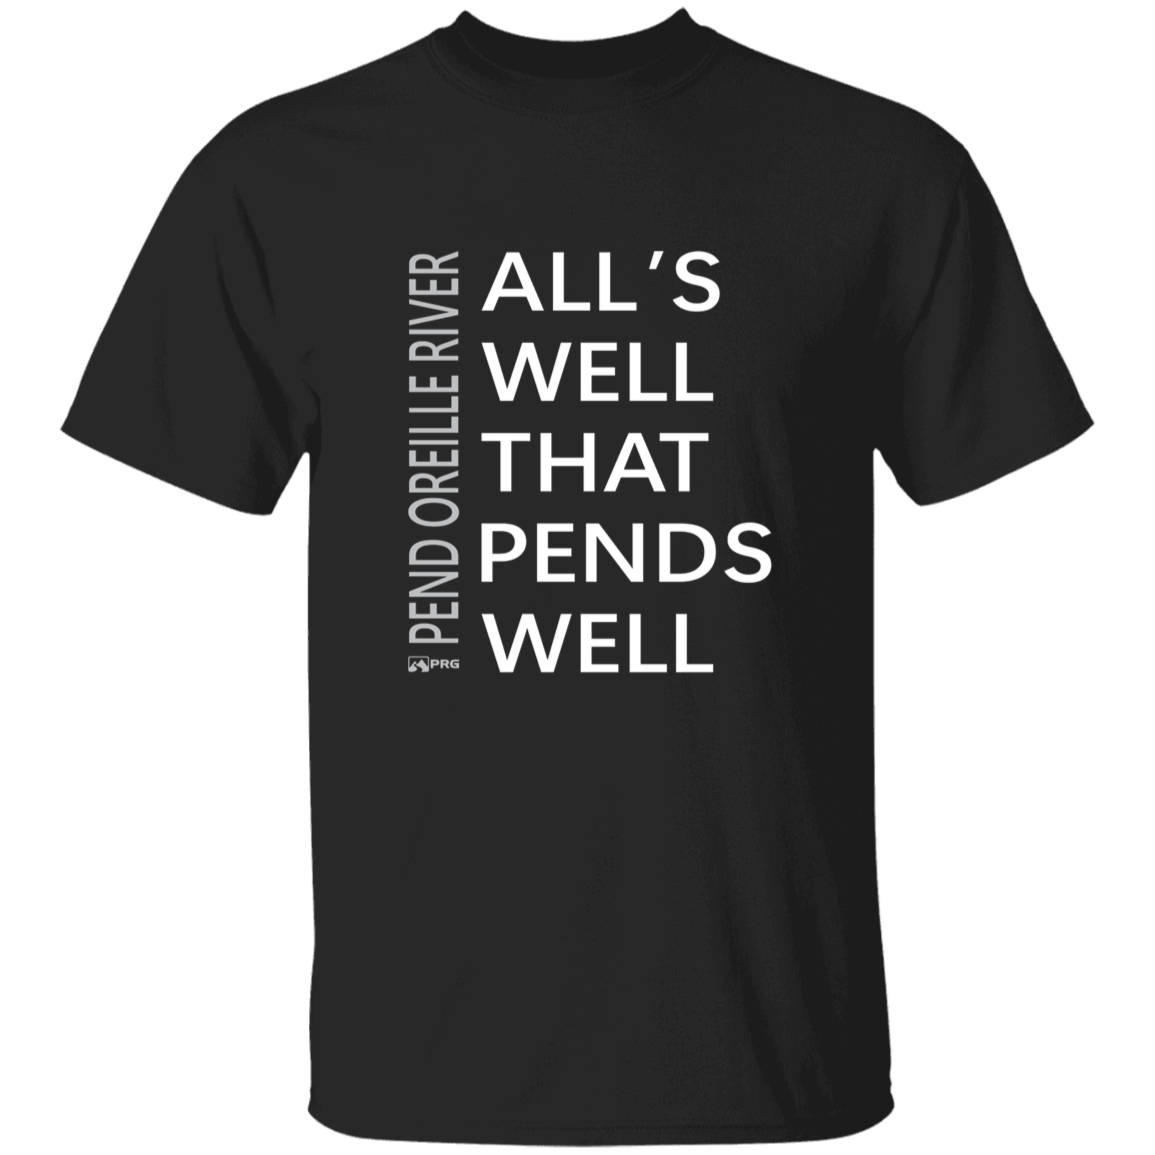 All's Well - Youth Shirt